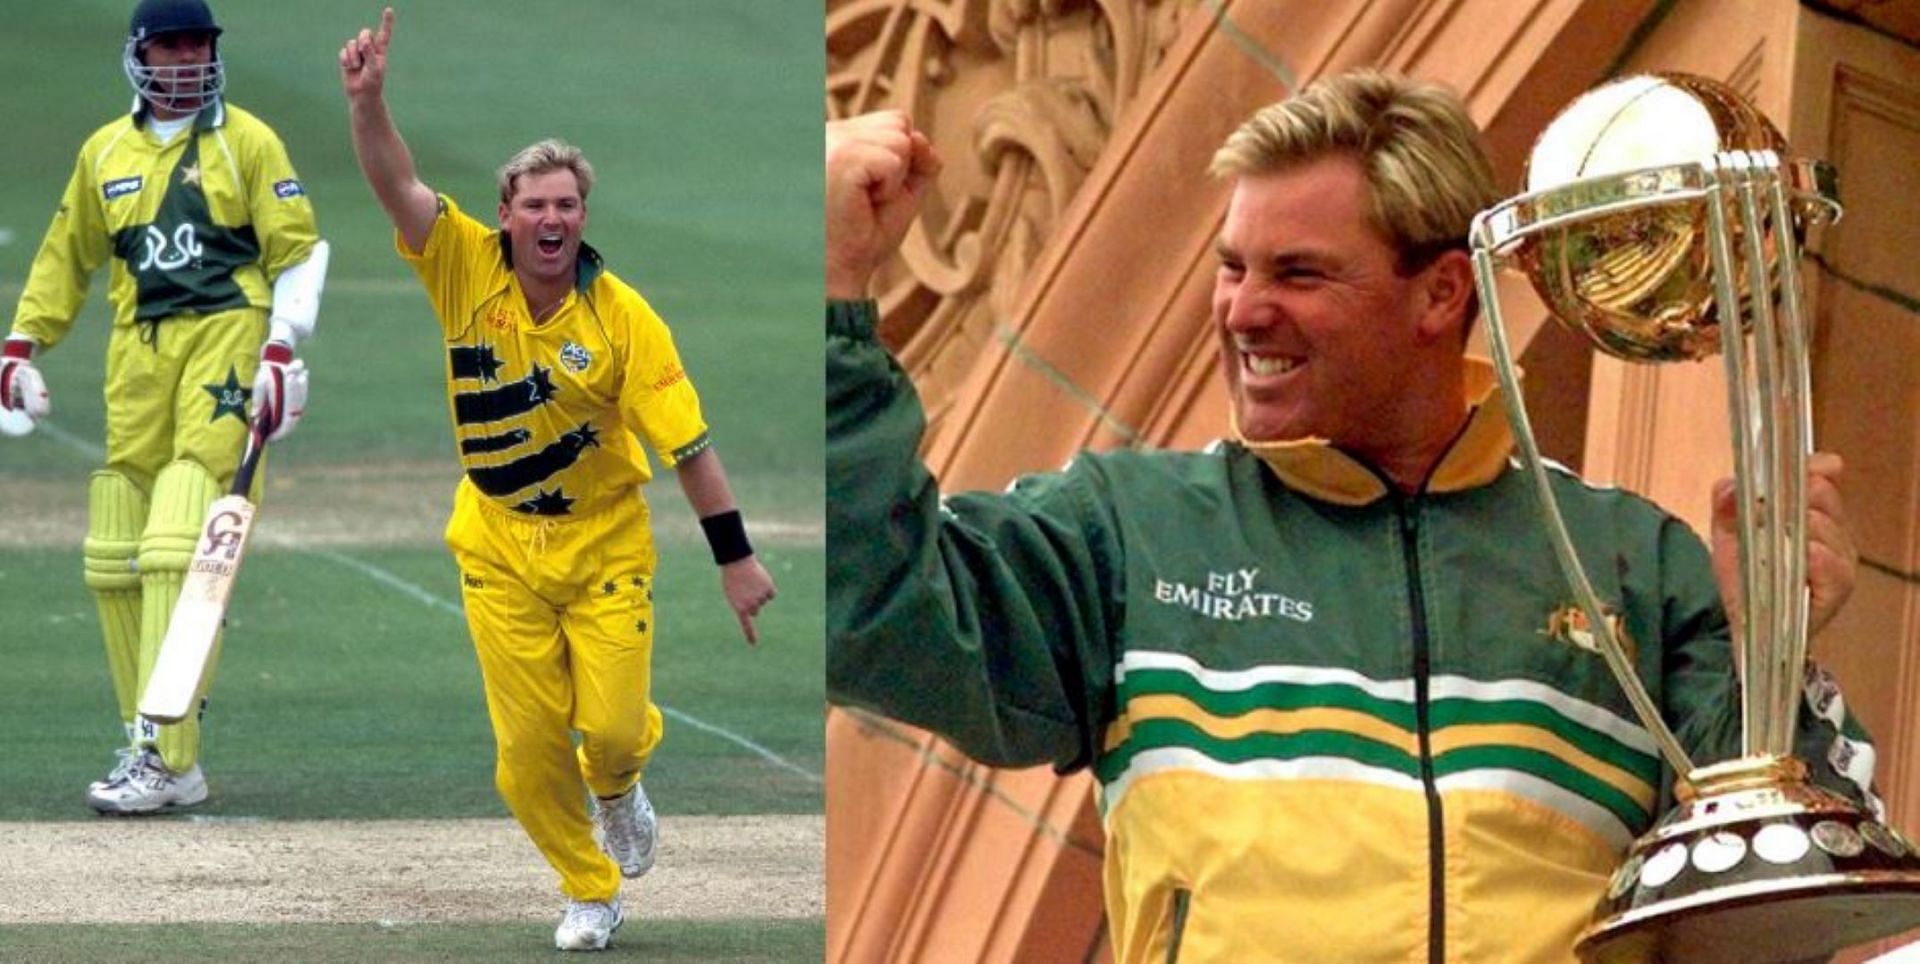 Shane Warne ripped the hearts of South African and Pakistan fans in the 1999 World Cup.